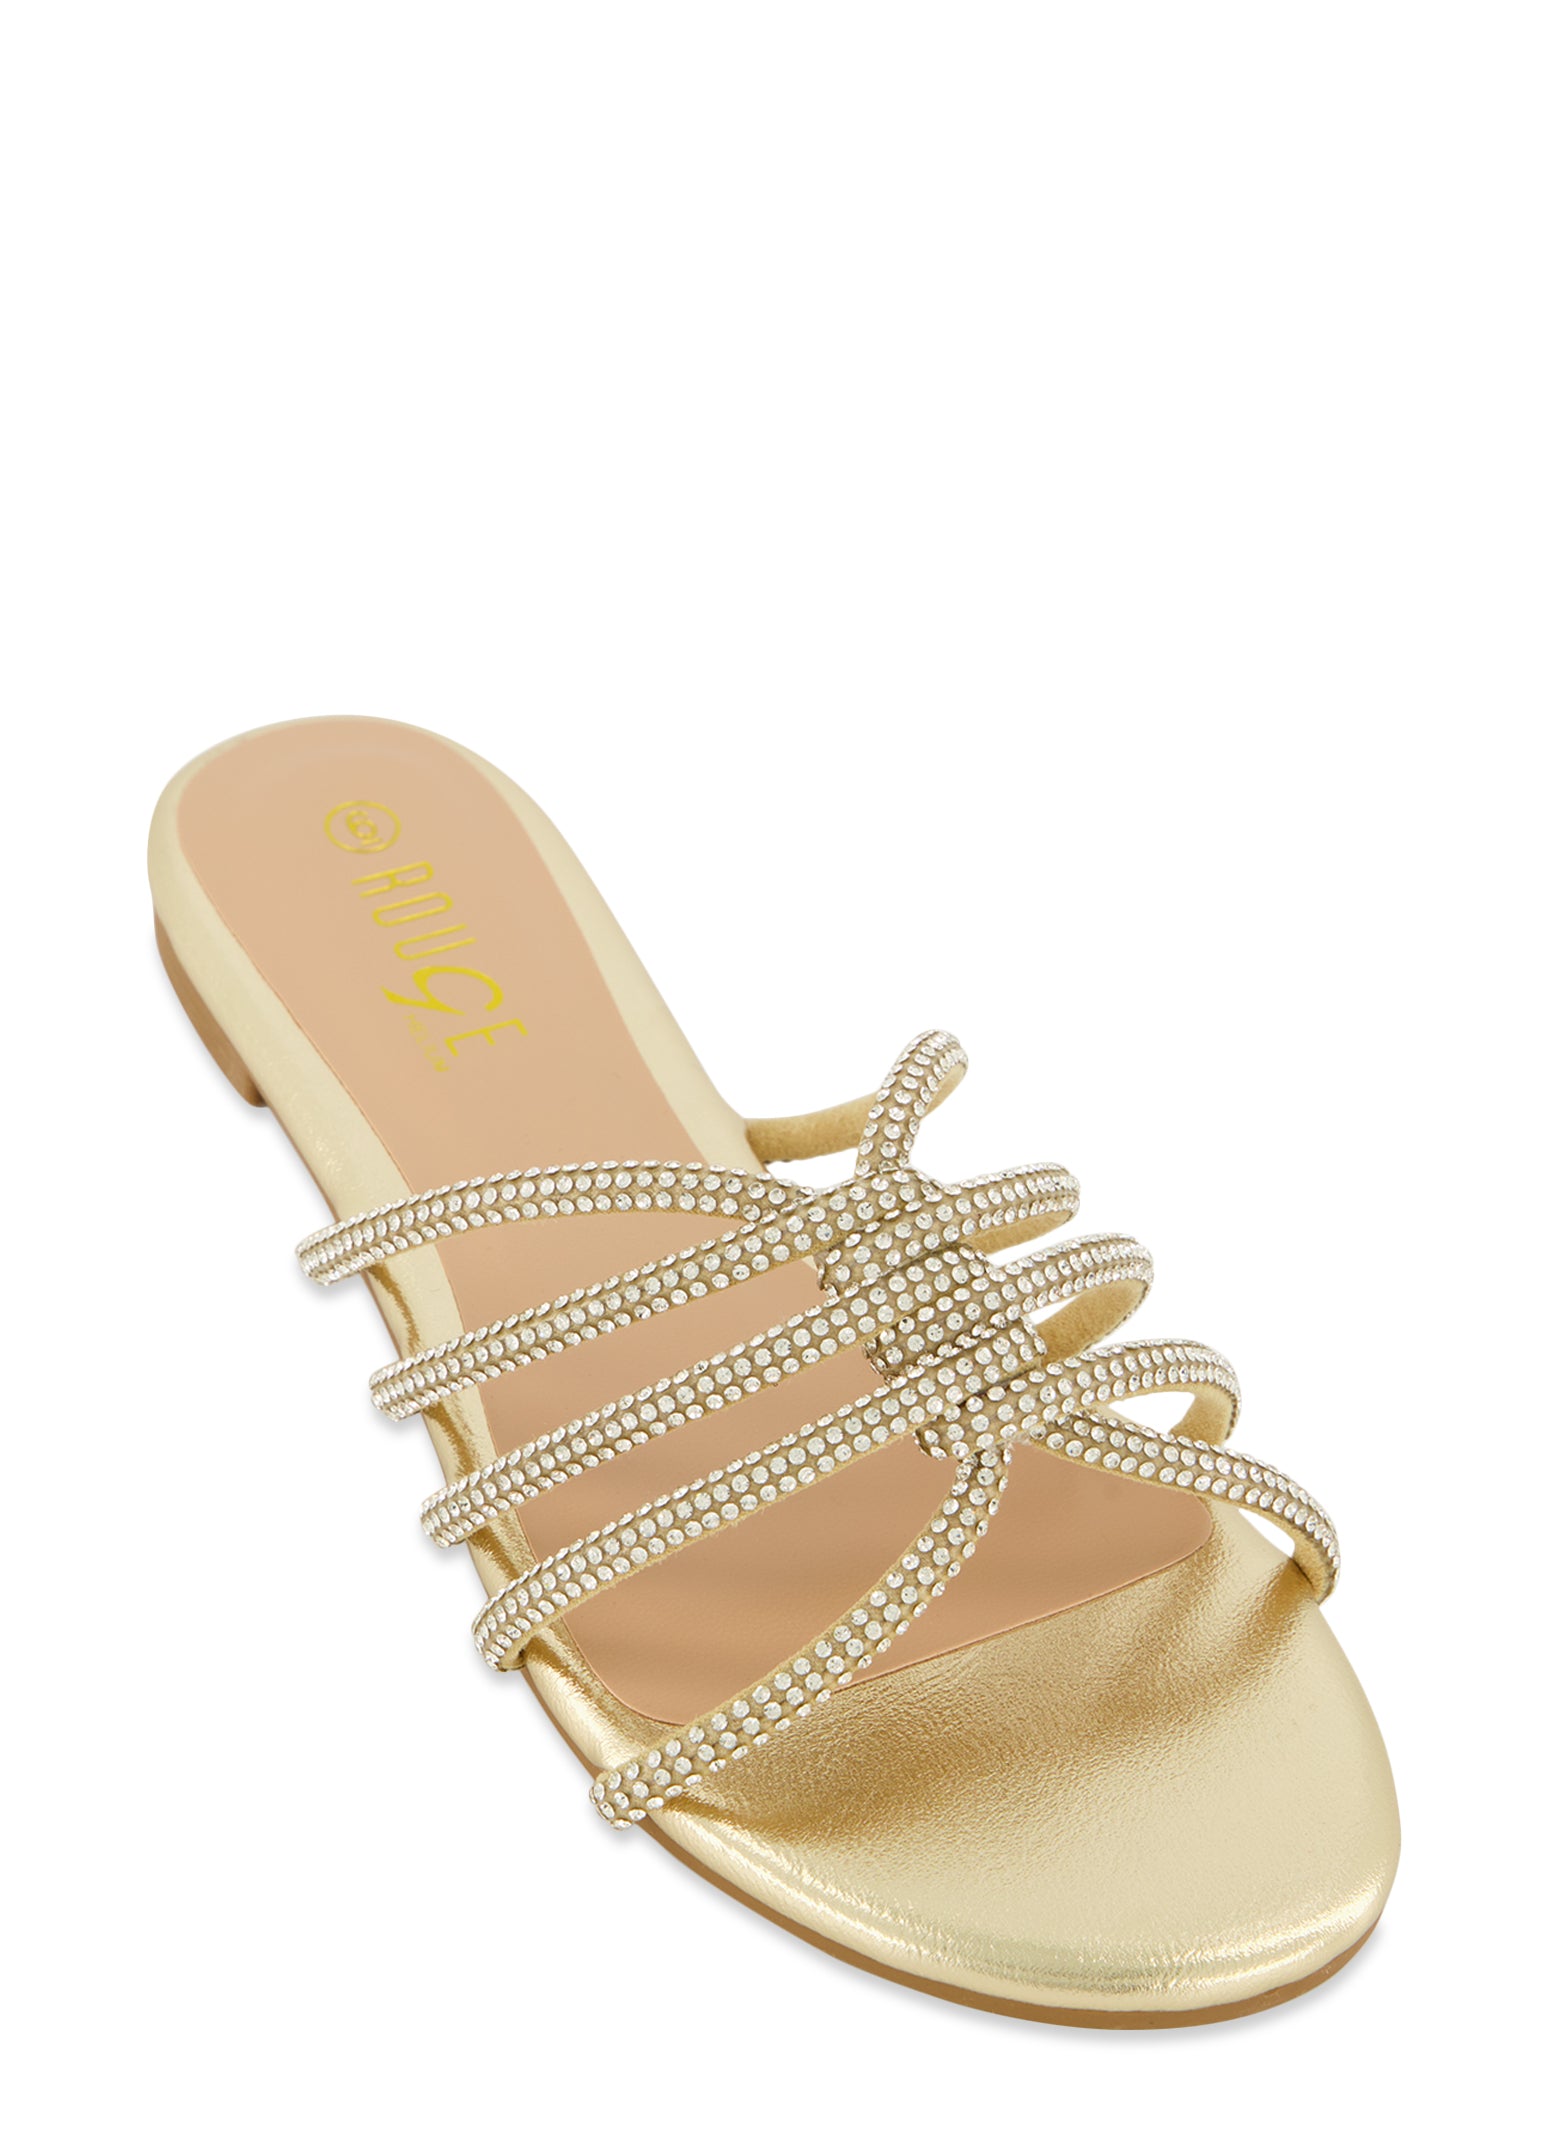 Buy Gold Flat Sandals for Women by Fyre Rose Online | Ajio.com